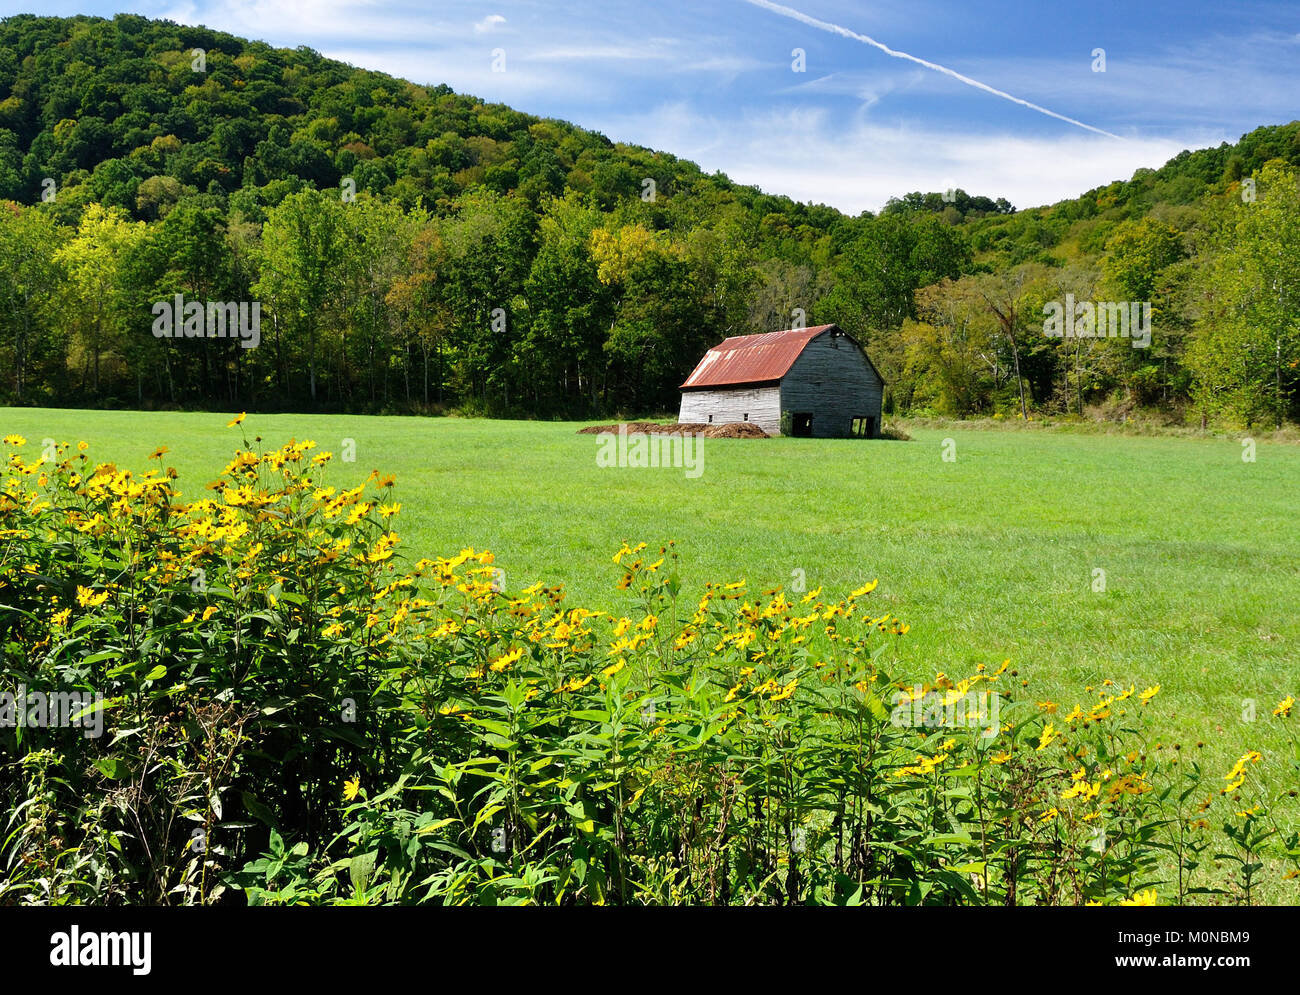 barn in the midst of a grassy meadow graced with wildflowers Stock Photo